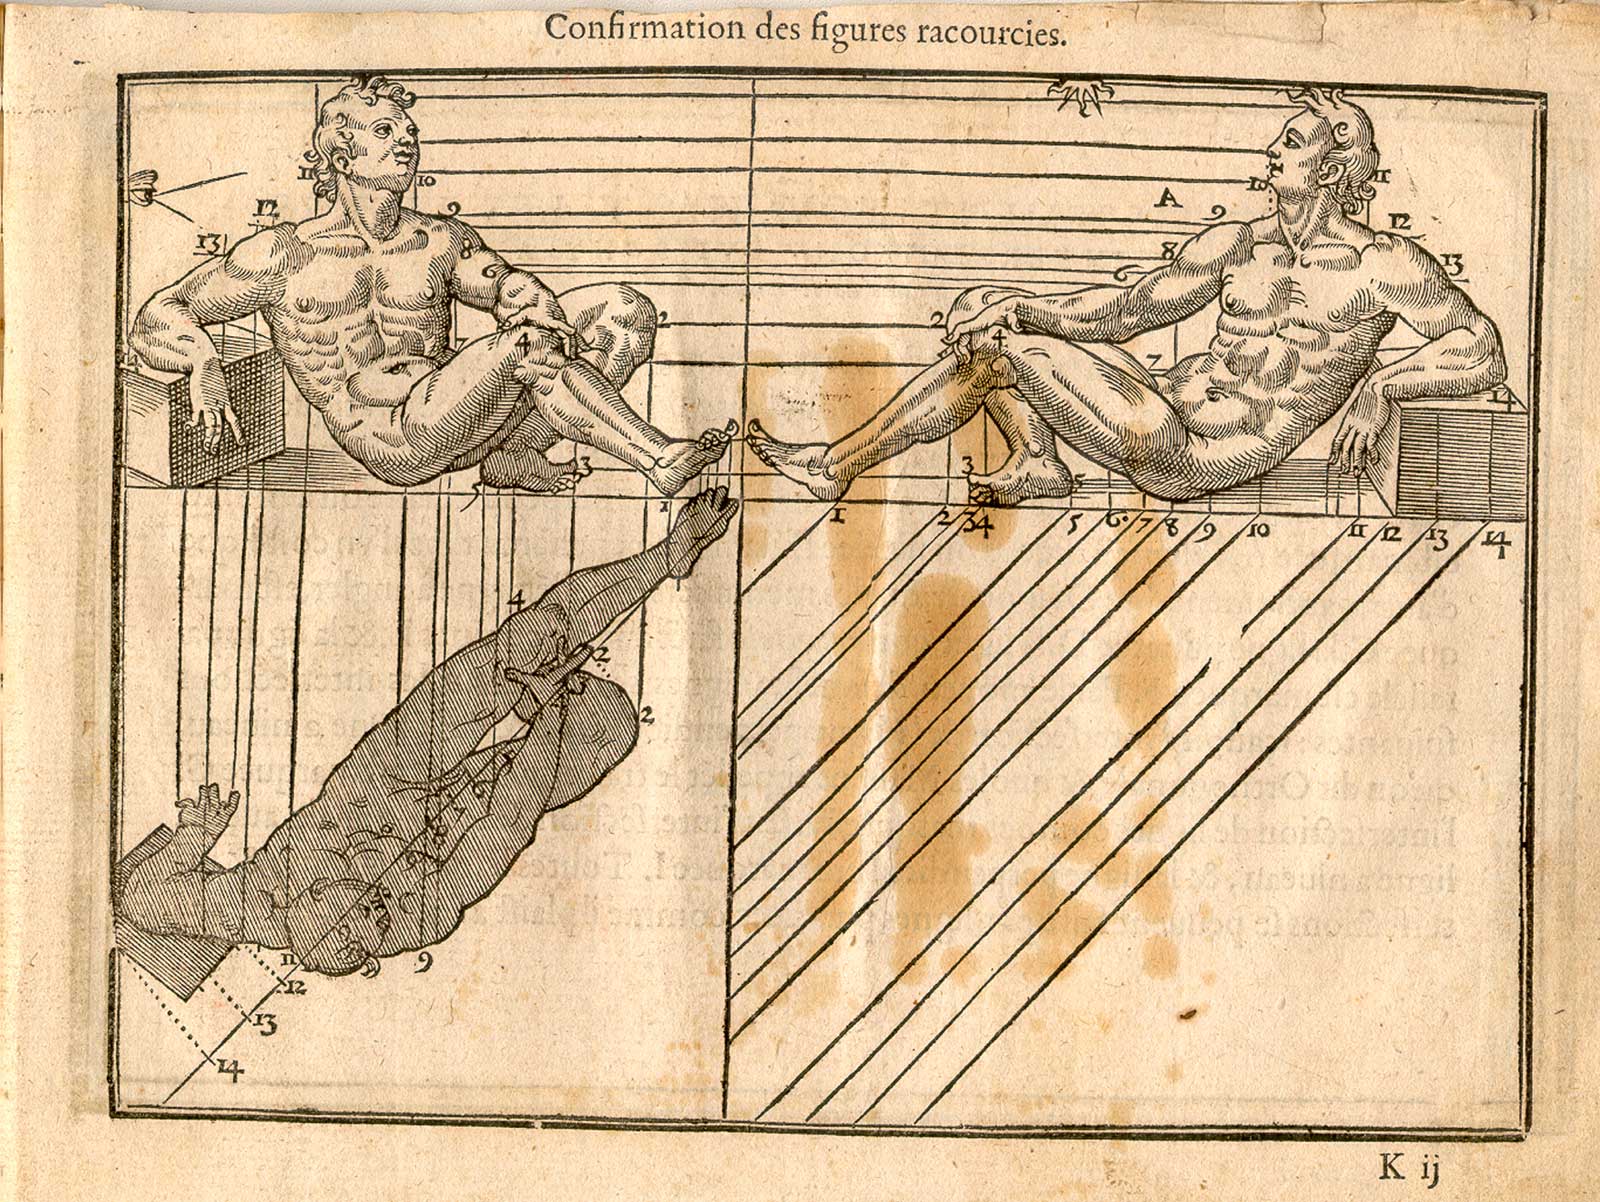 Woodcut illustration of two nude male anatomical figures reclining on small pediments, viewed from the sides, both images in identical poses facing each other with left hands uplifted with hands open, both images showing the proportions of the figure measured out, from Jehan Cousin’s Livre de pourtraiture, NLM Call no.: WZ 250 C8673L 1608.